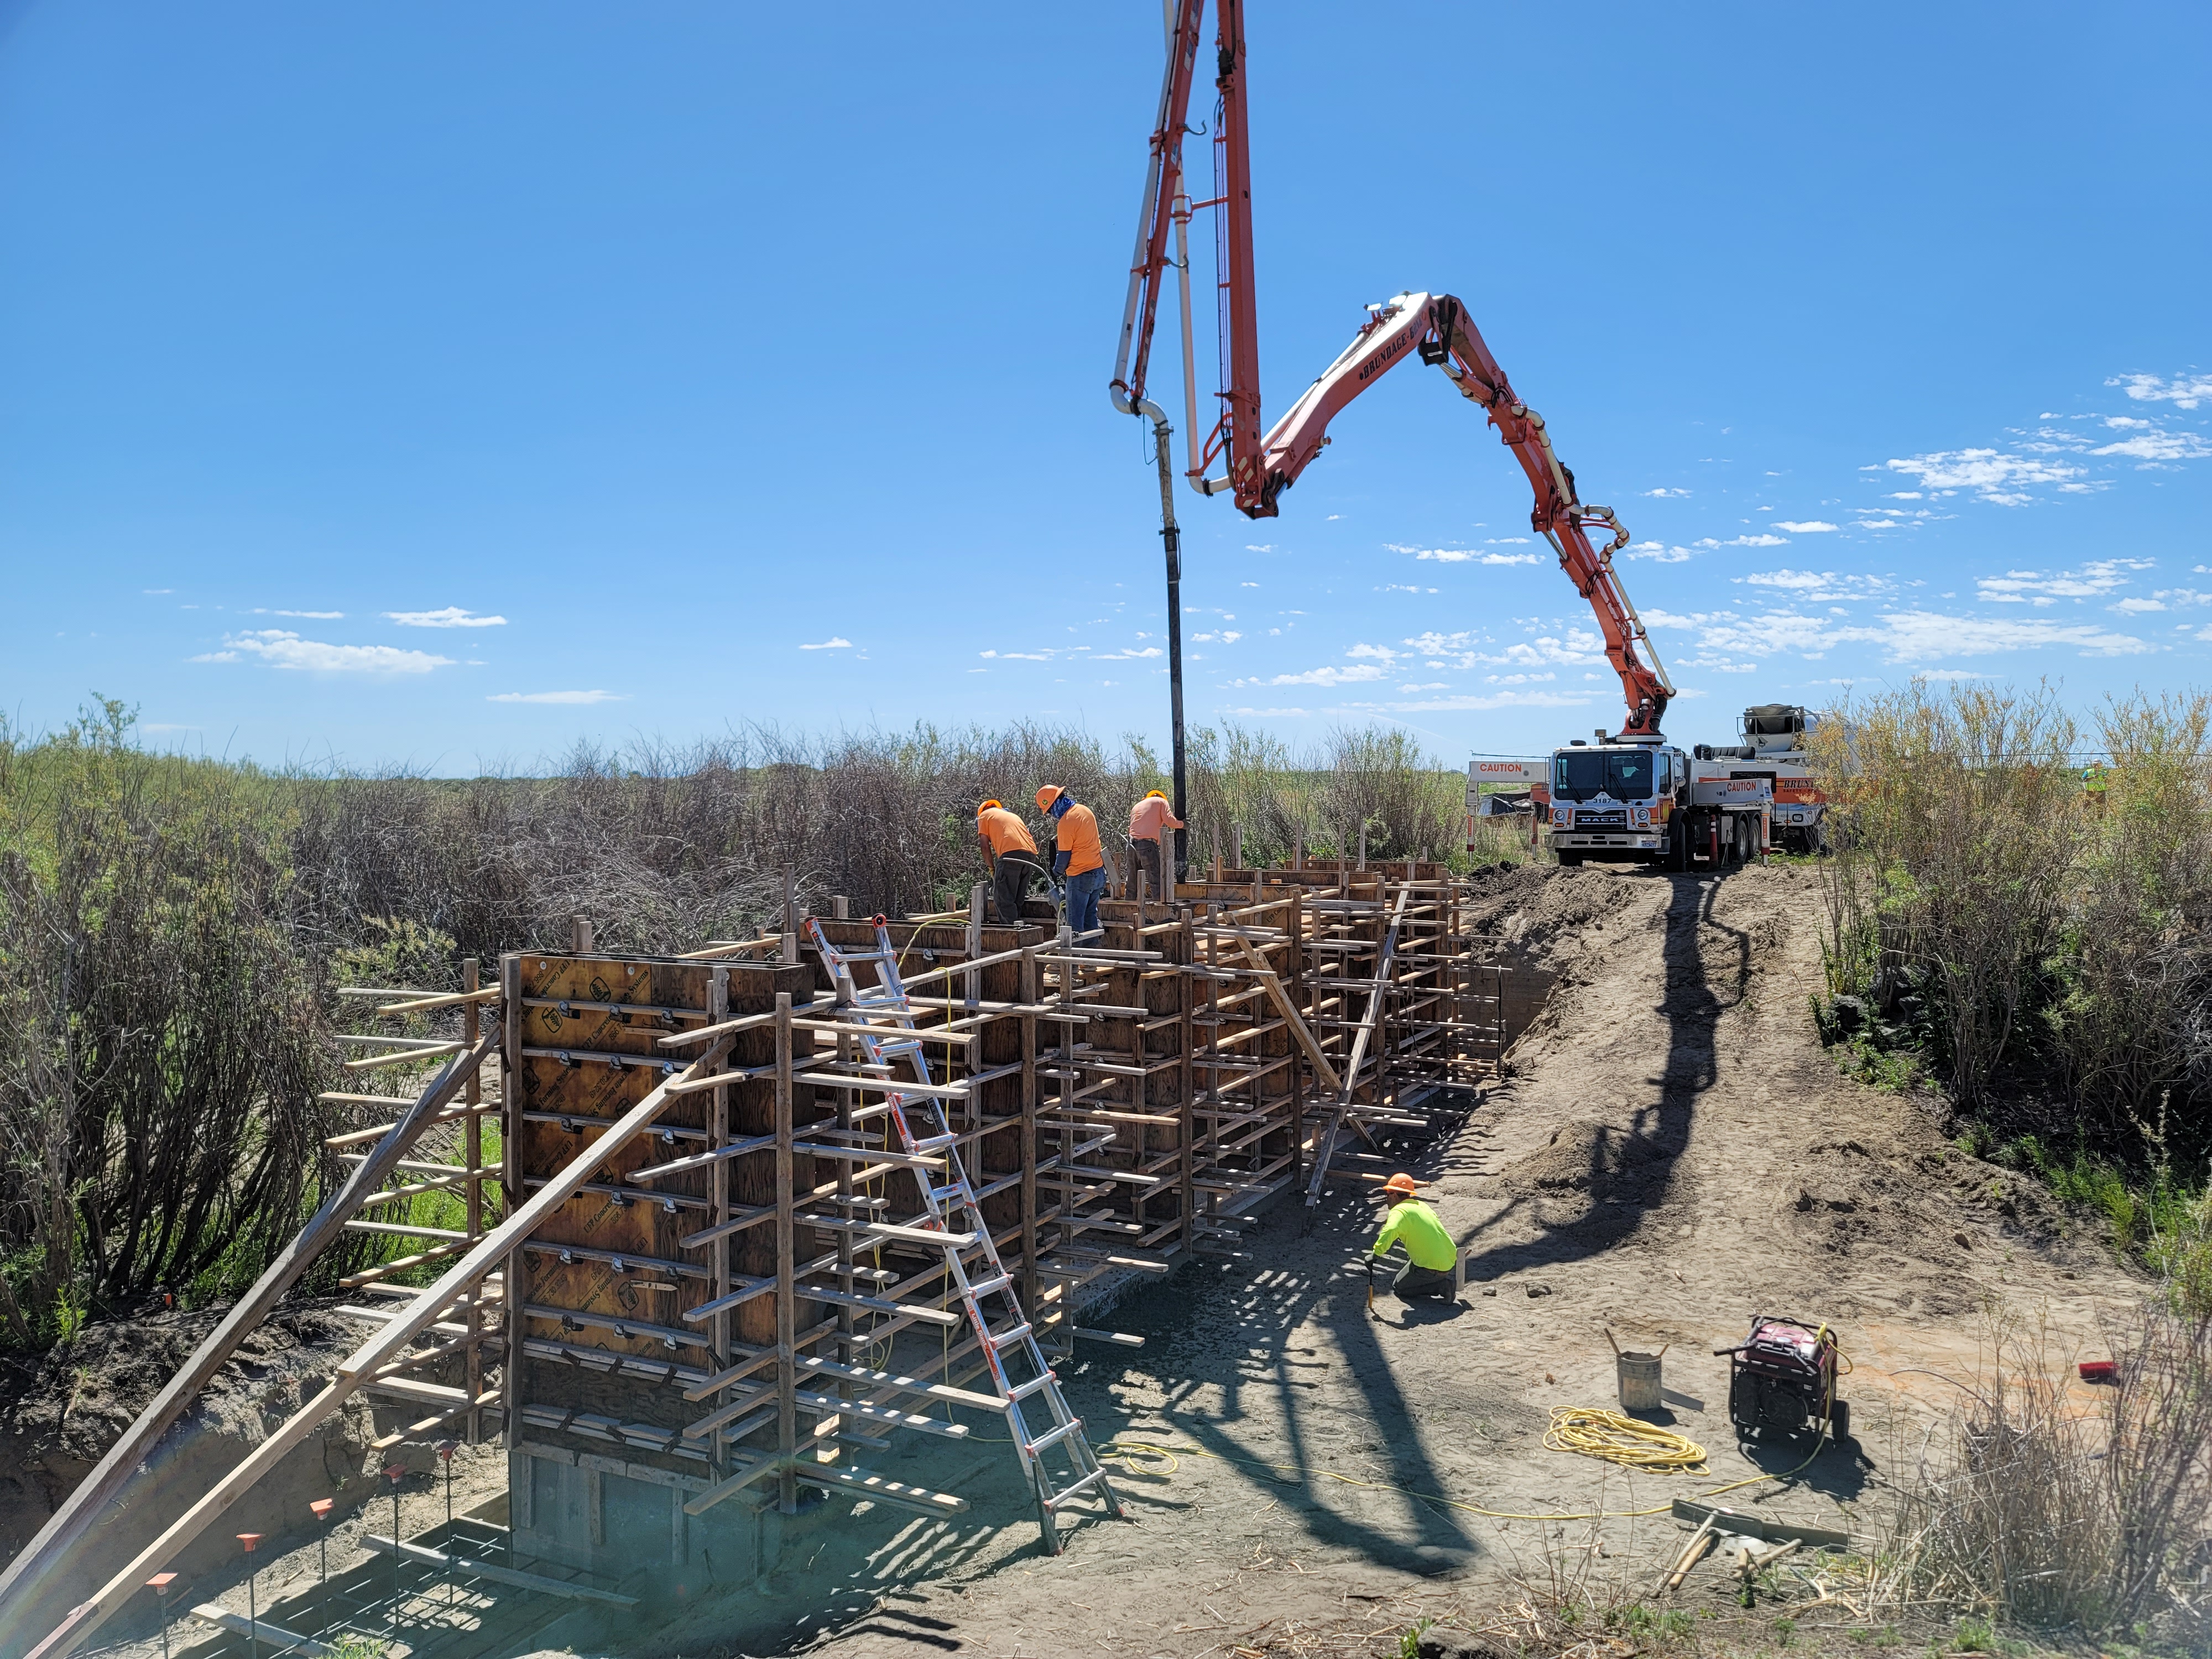 Construction workers build a structure at an Idaho refuge, with a truck using a crane arm to pipe in materials, on a clear day.